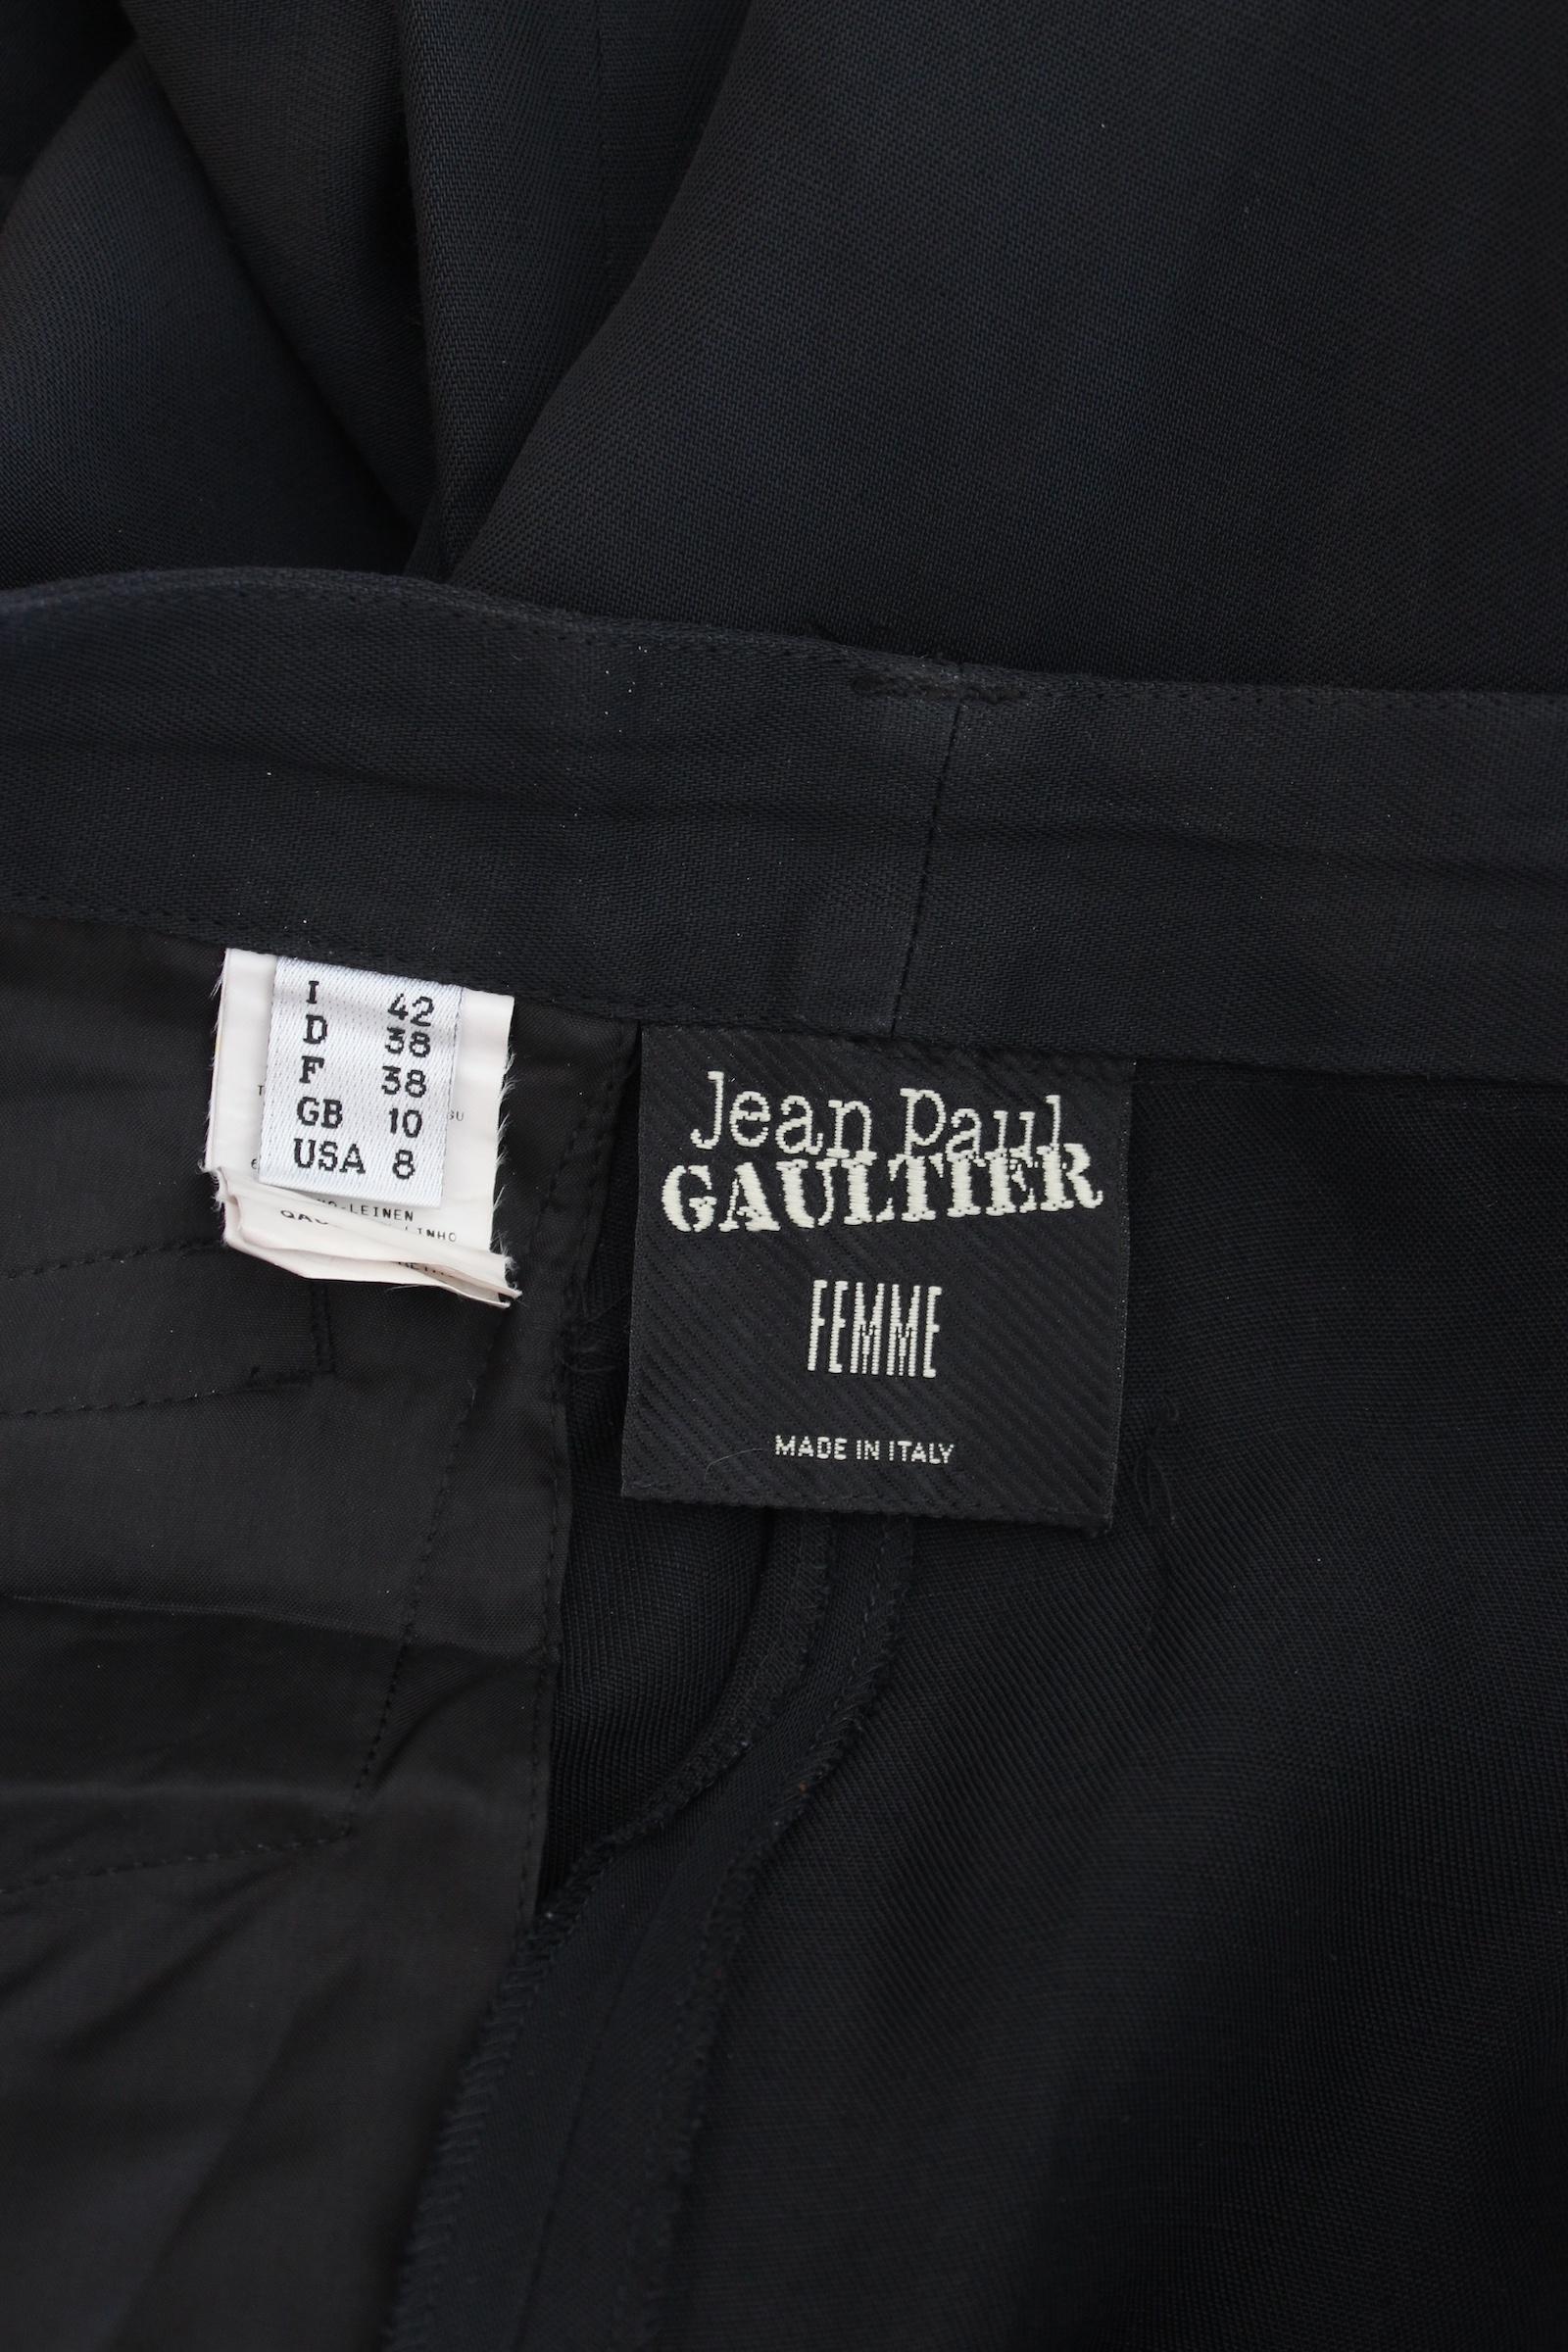 Jean Paul Gaultier Femme vintage 90s black trousers. Evening trousers, high waist, pockets on the sides and on the back, 66% rayon, 34% linen fabric. Made in italy.

Size: 42 It 8 Us 10 Uk

Waist: 42 cm
Length: 104 cm
Internal length: 82 cm
Hem: 30